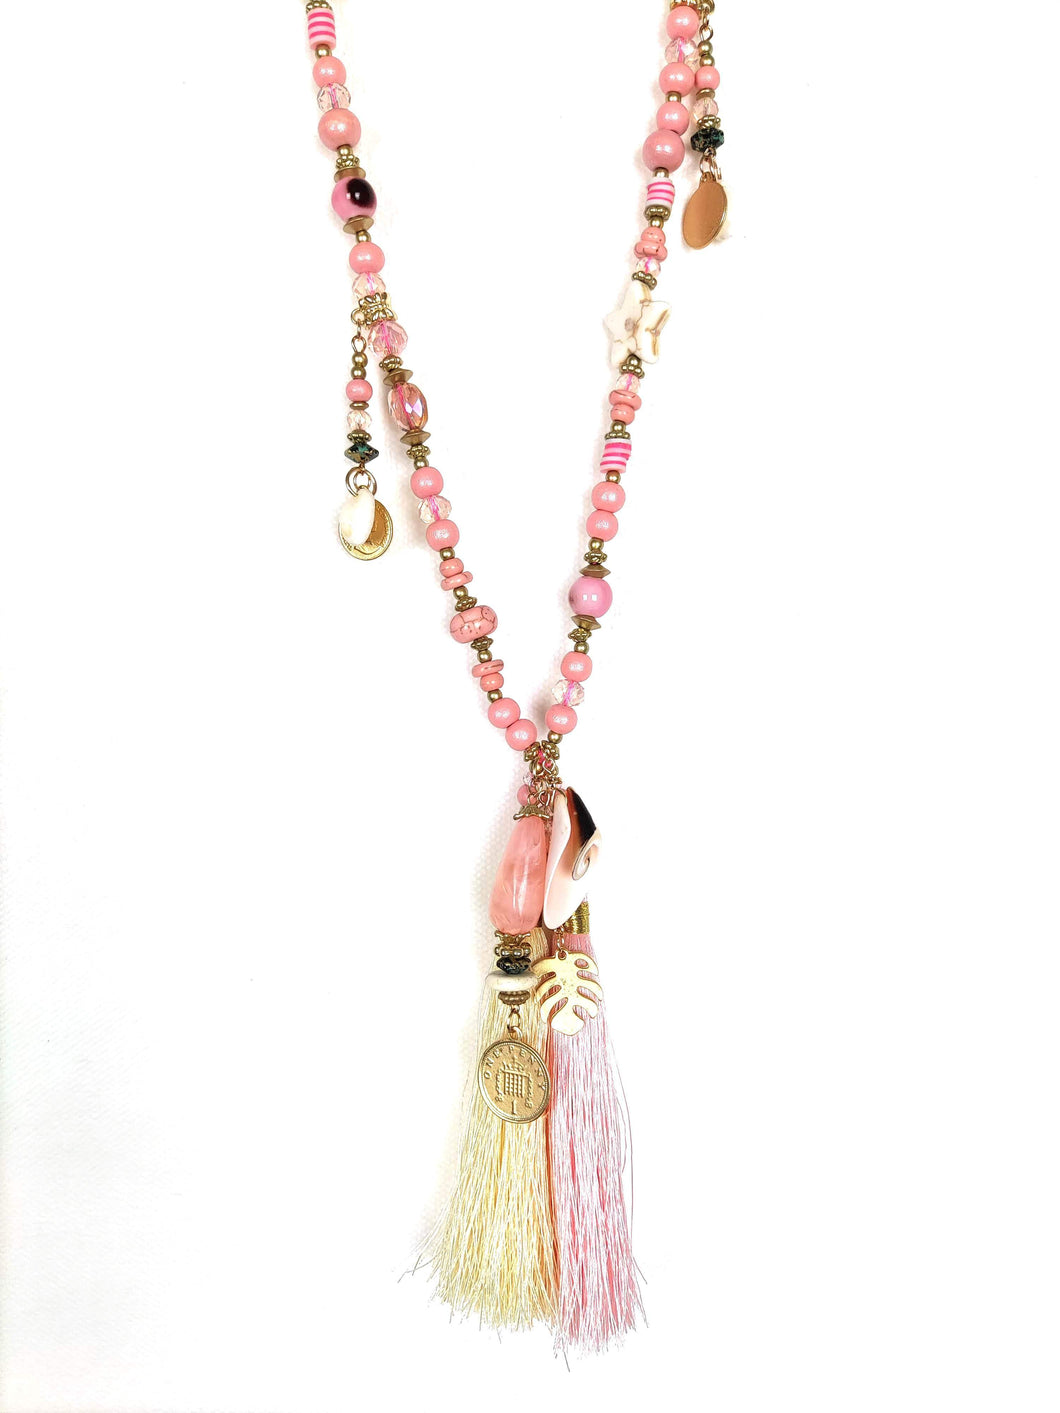 KETTE TASSLE BEIGE ROSA - hippie style and more